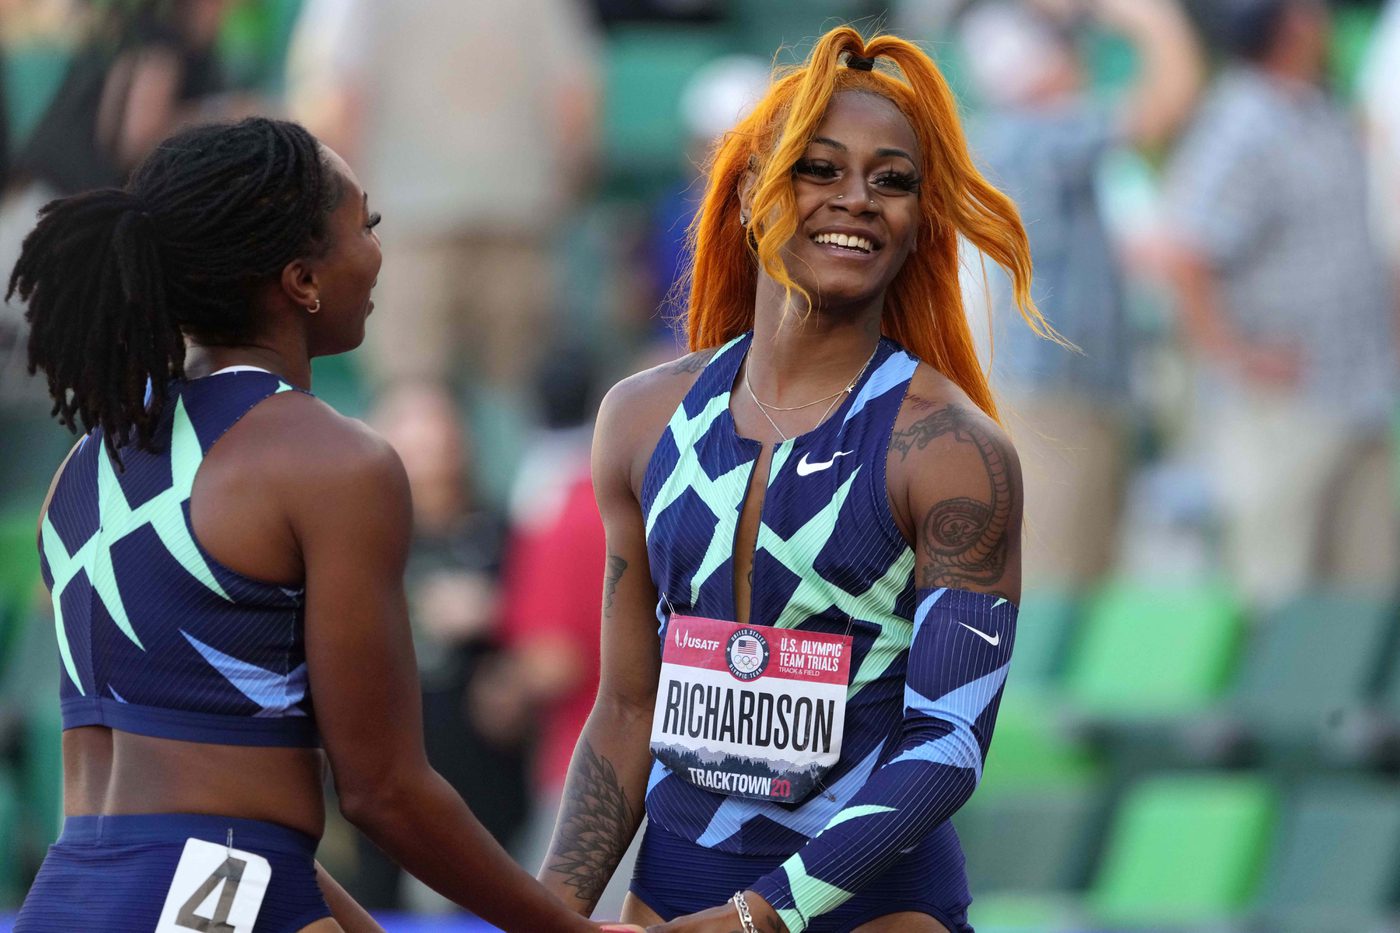 Jun 19, 2021; Eugene, OR, USA; Sha'Carri Richardson (right) celebrates with Javianne Oliver after winning the women's 100m in 10.86 during the US Olympic Team Trials at Hayward Field. Mandatory Credit: Kirby Lee-USA TODAY Sports